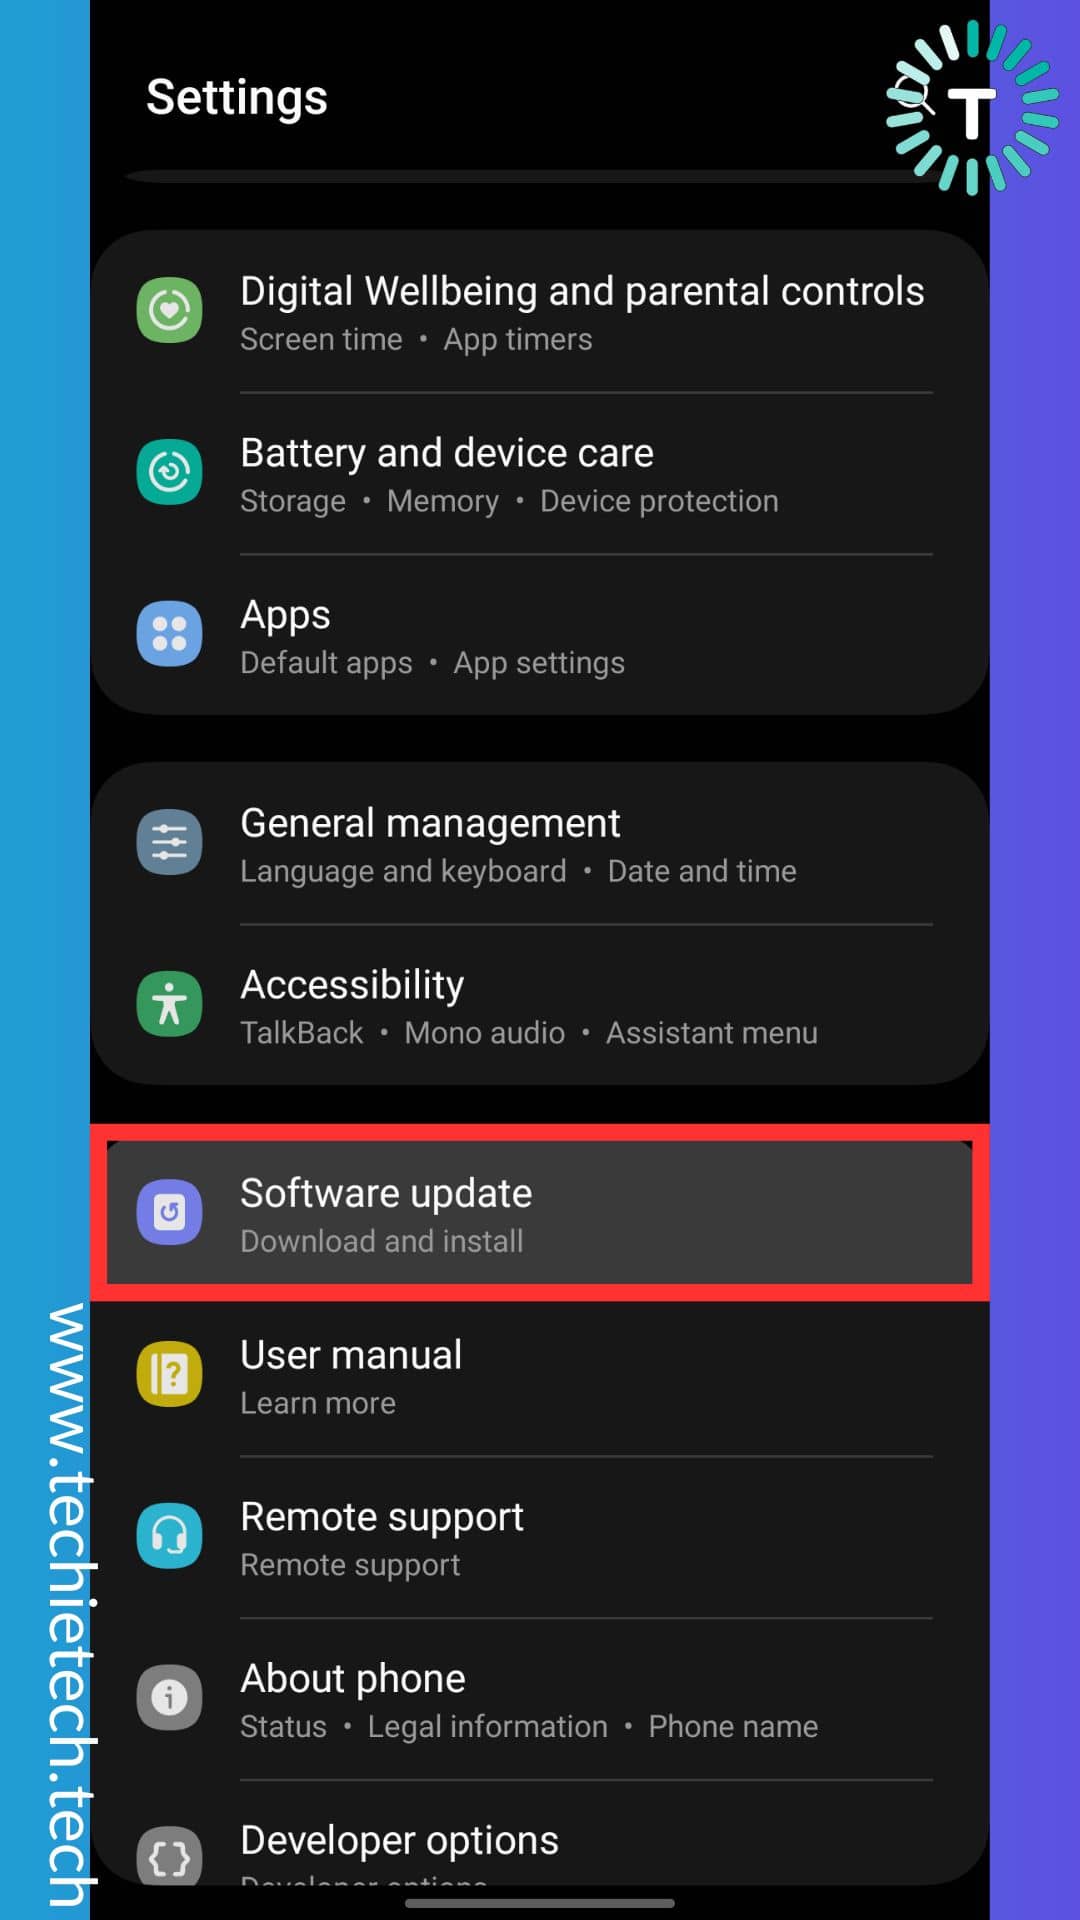 Go to Settings and tap on Software Updates